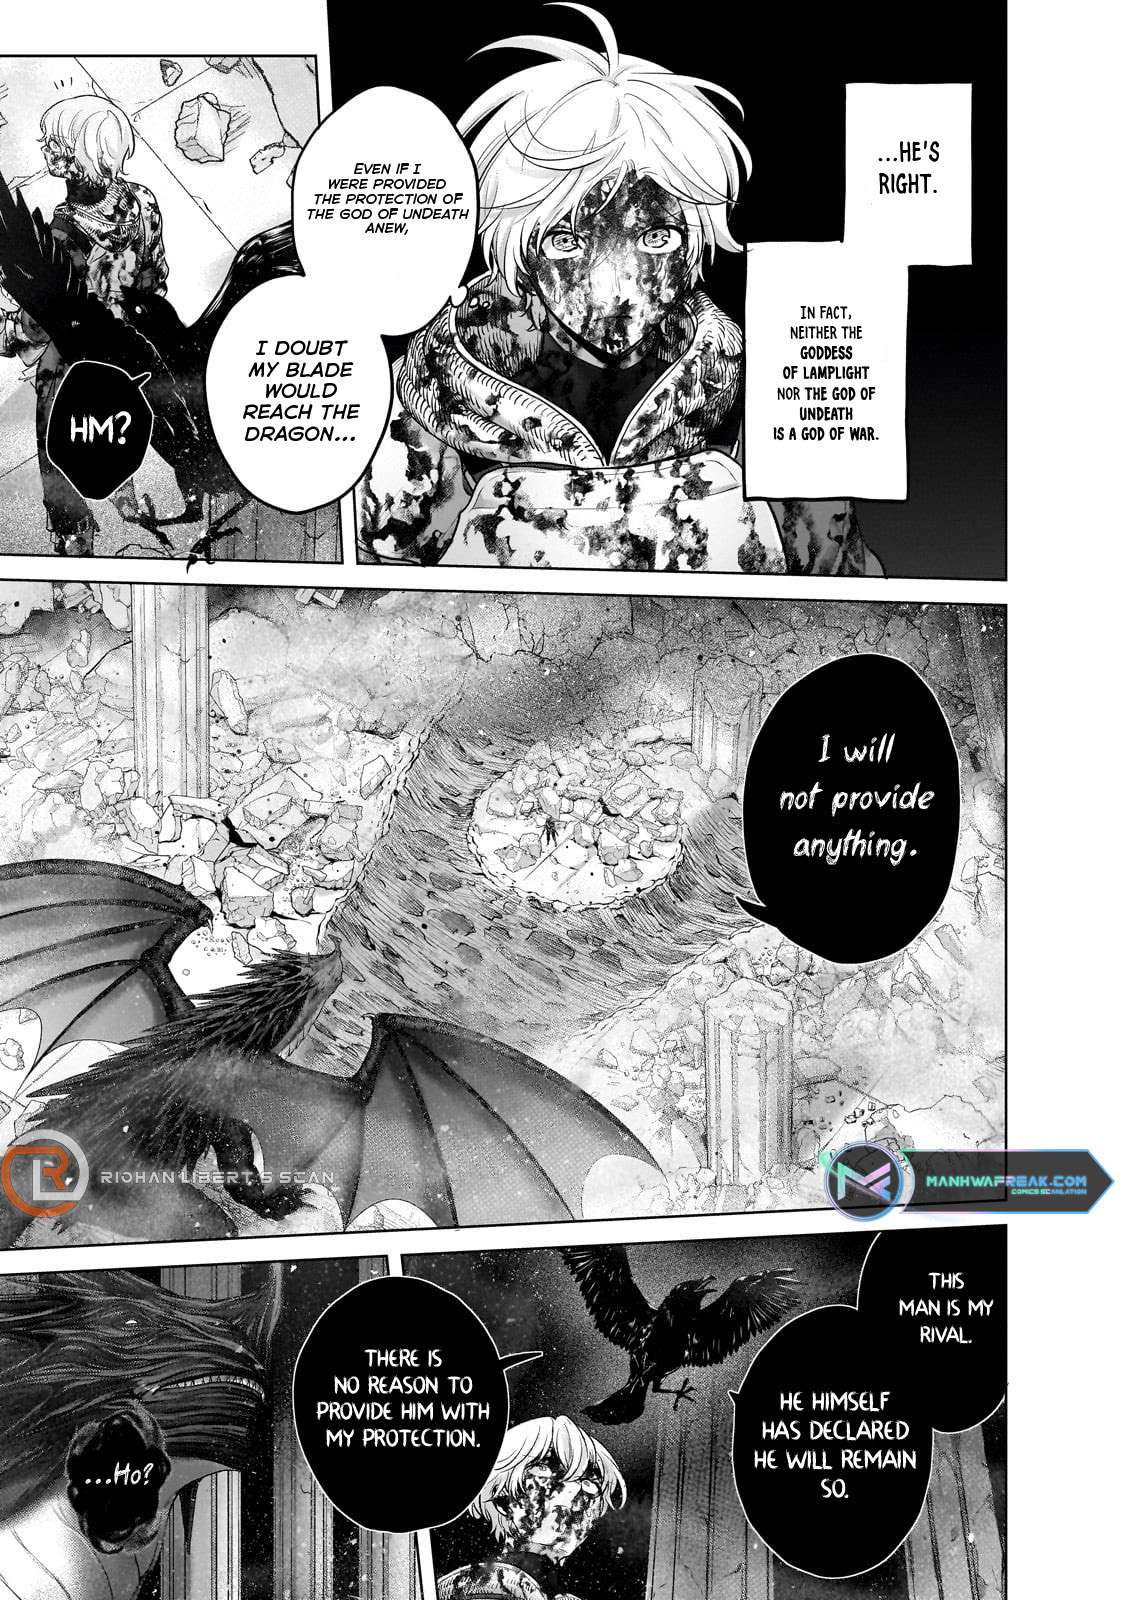 Read Saihate No Paladin Vol.4 Chapter 20.5: Whitesails (2) on